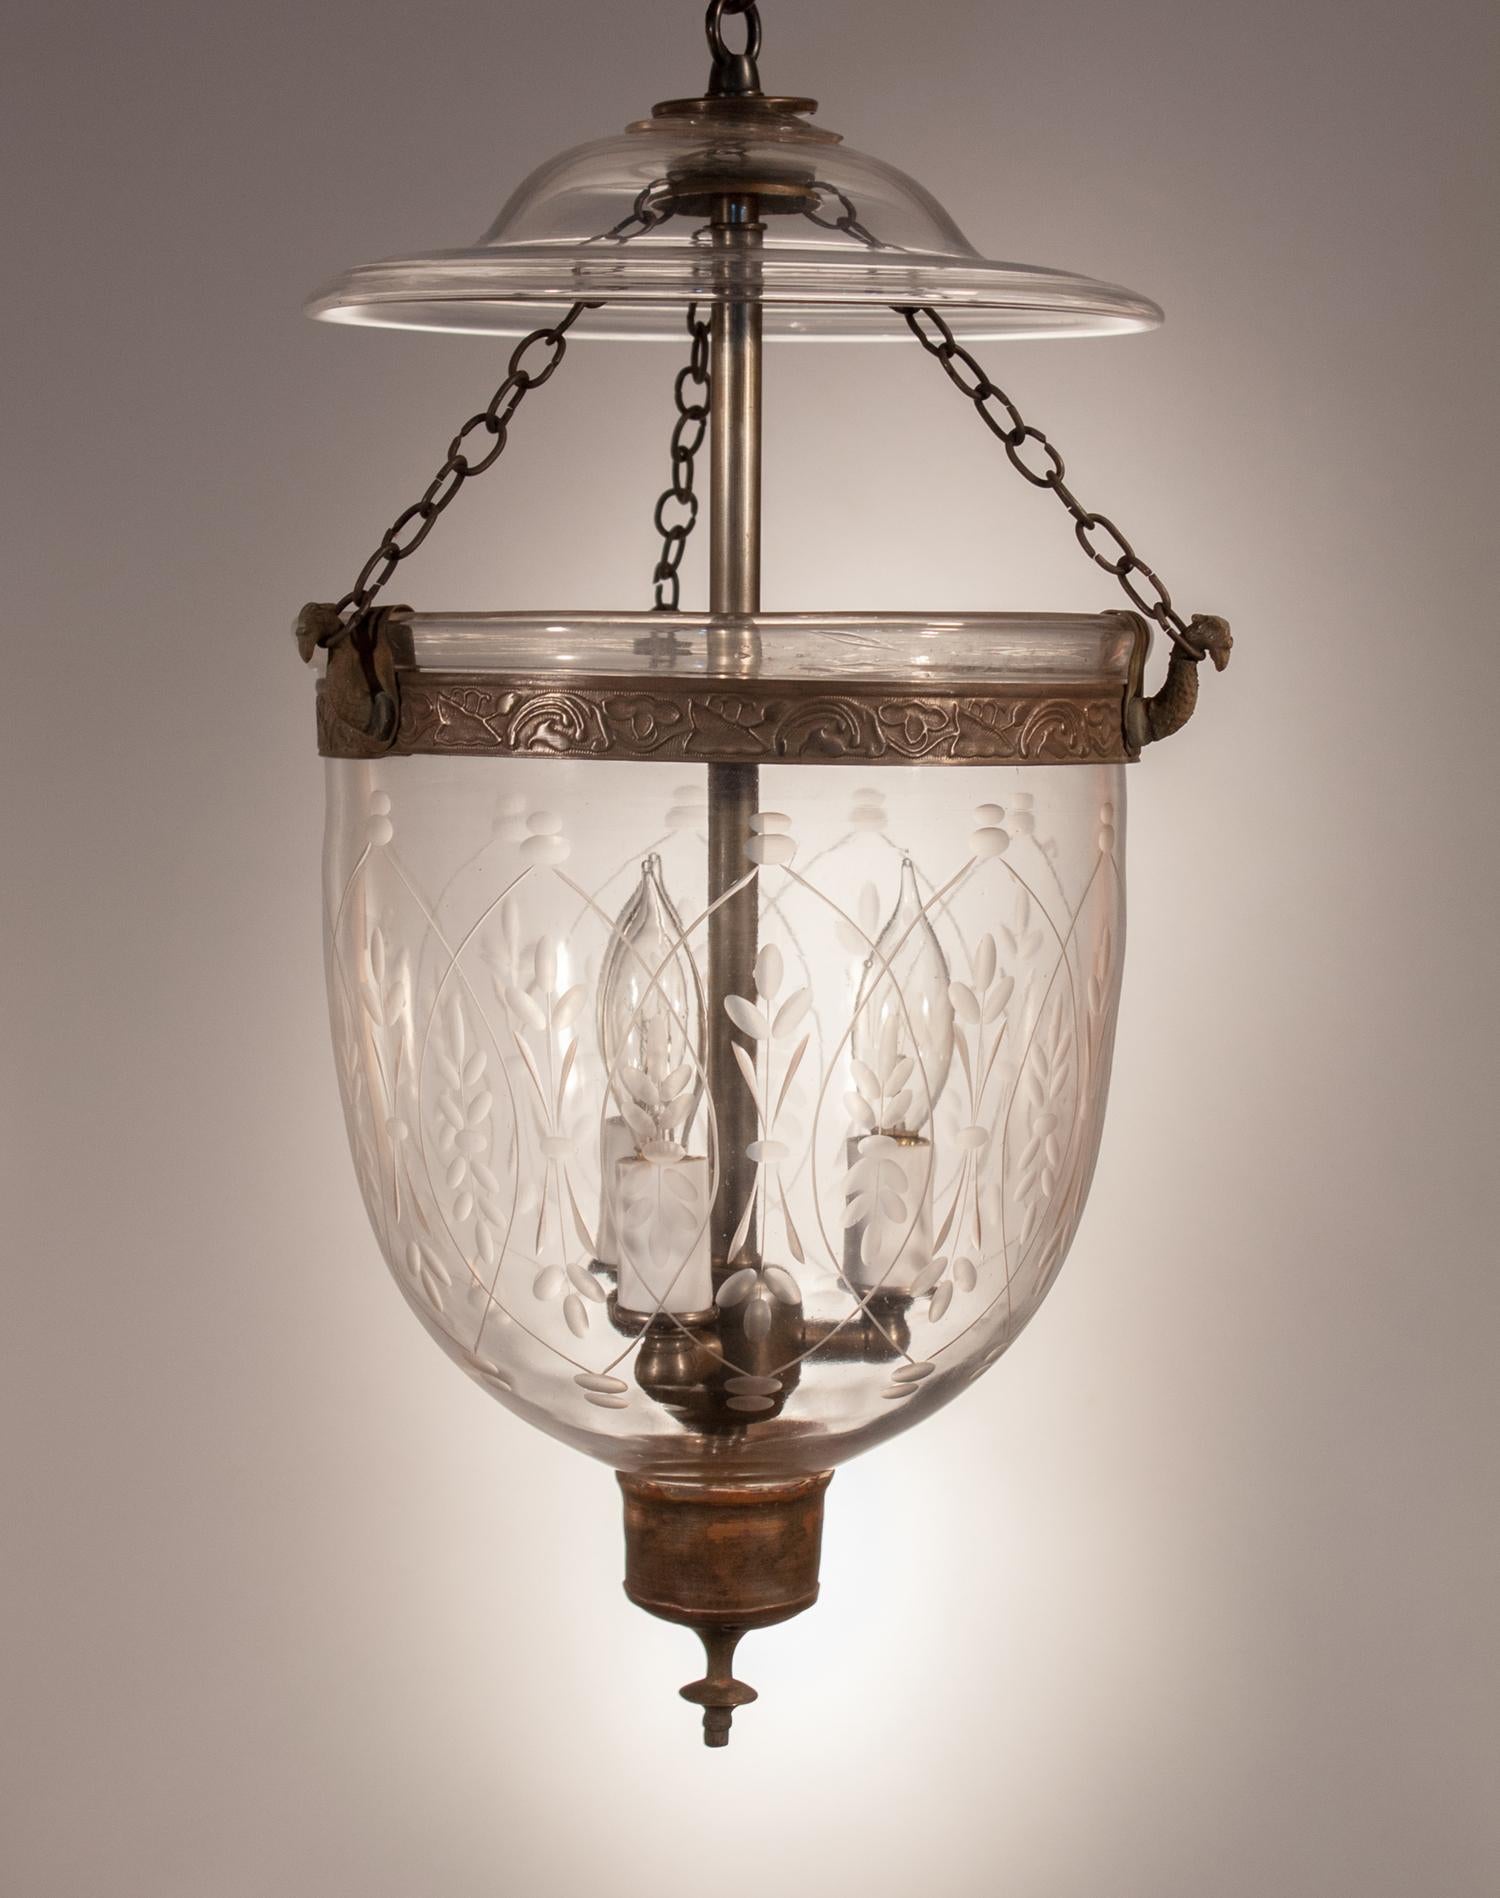 A Classic, smaller-sized English bell jar lantern, circa 1860, with lovely form and its original smoke bell and unadorned brass candleholder base. The bell jar's embossed brass band and chains have been replaced for safety. This petite hall lantern